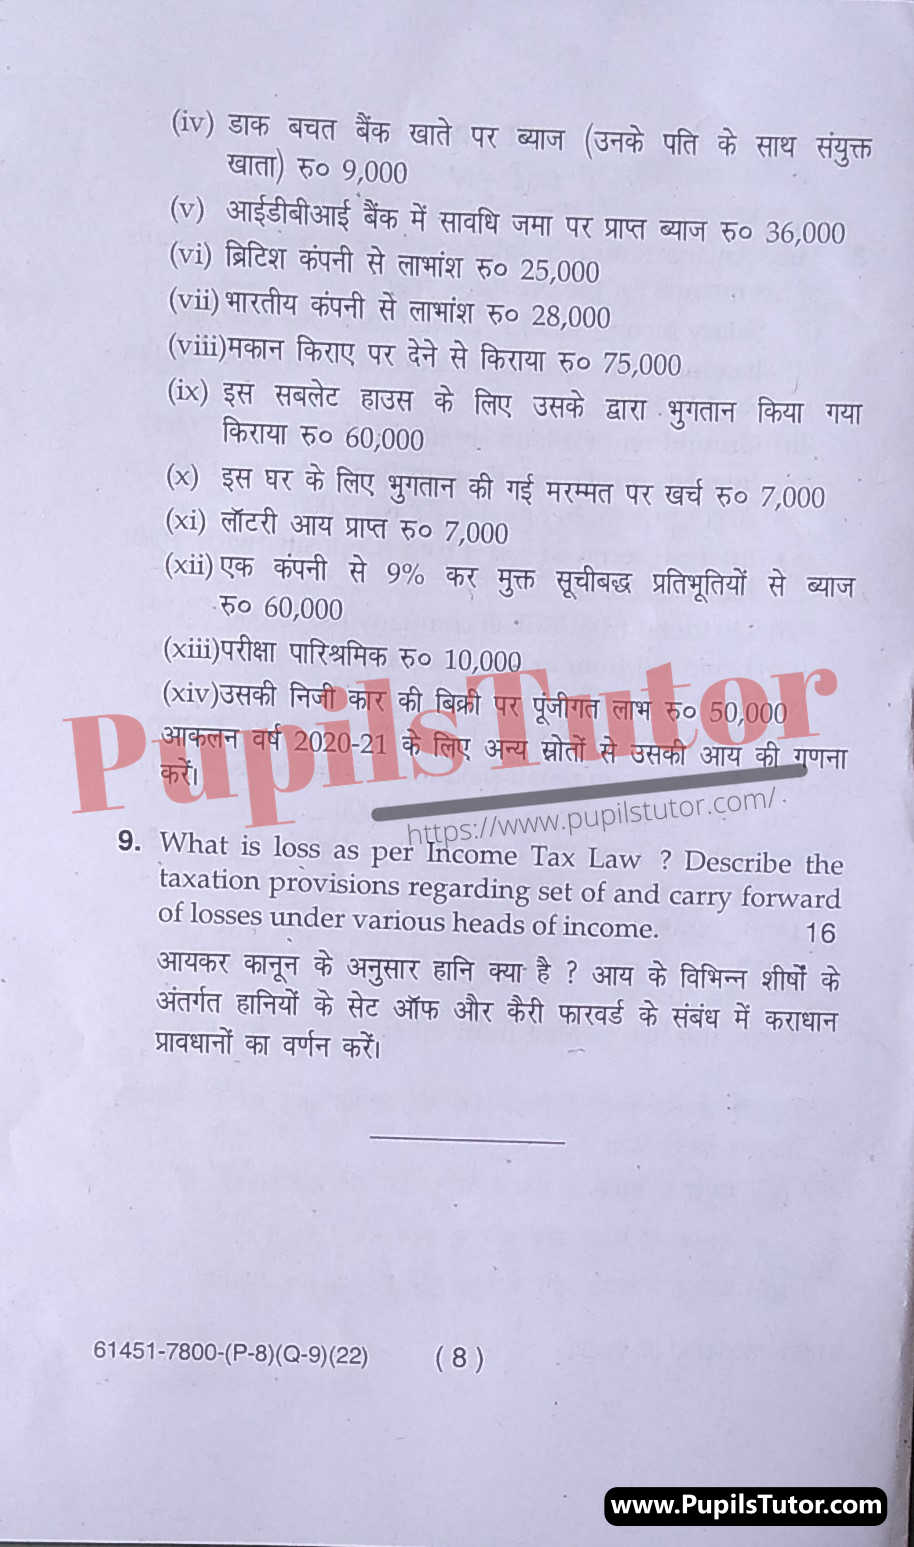 B.Com. 5th Semester Taxation Law 2022 Question Paper For Maharshi Dayanand University, Rohtak In English And Hindi Language (Page 8)